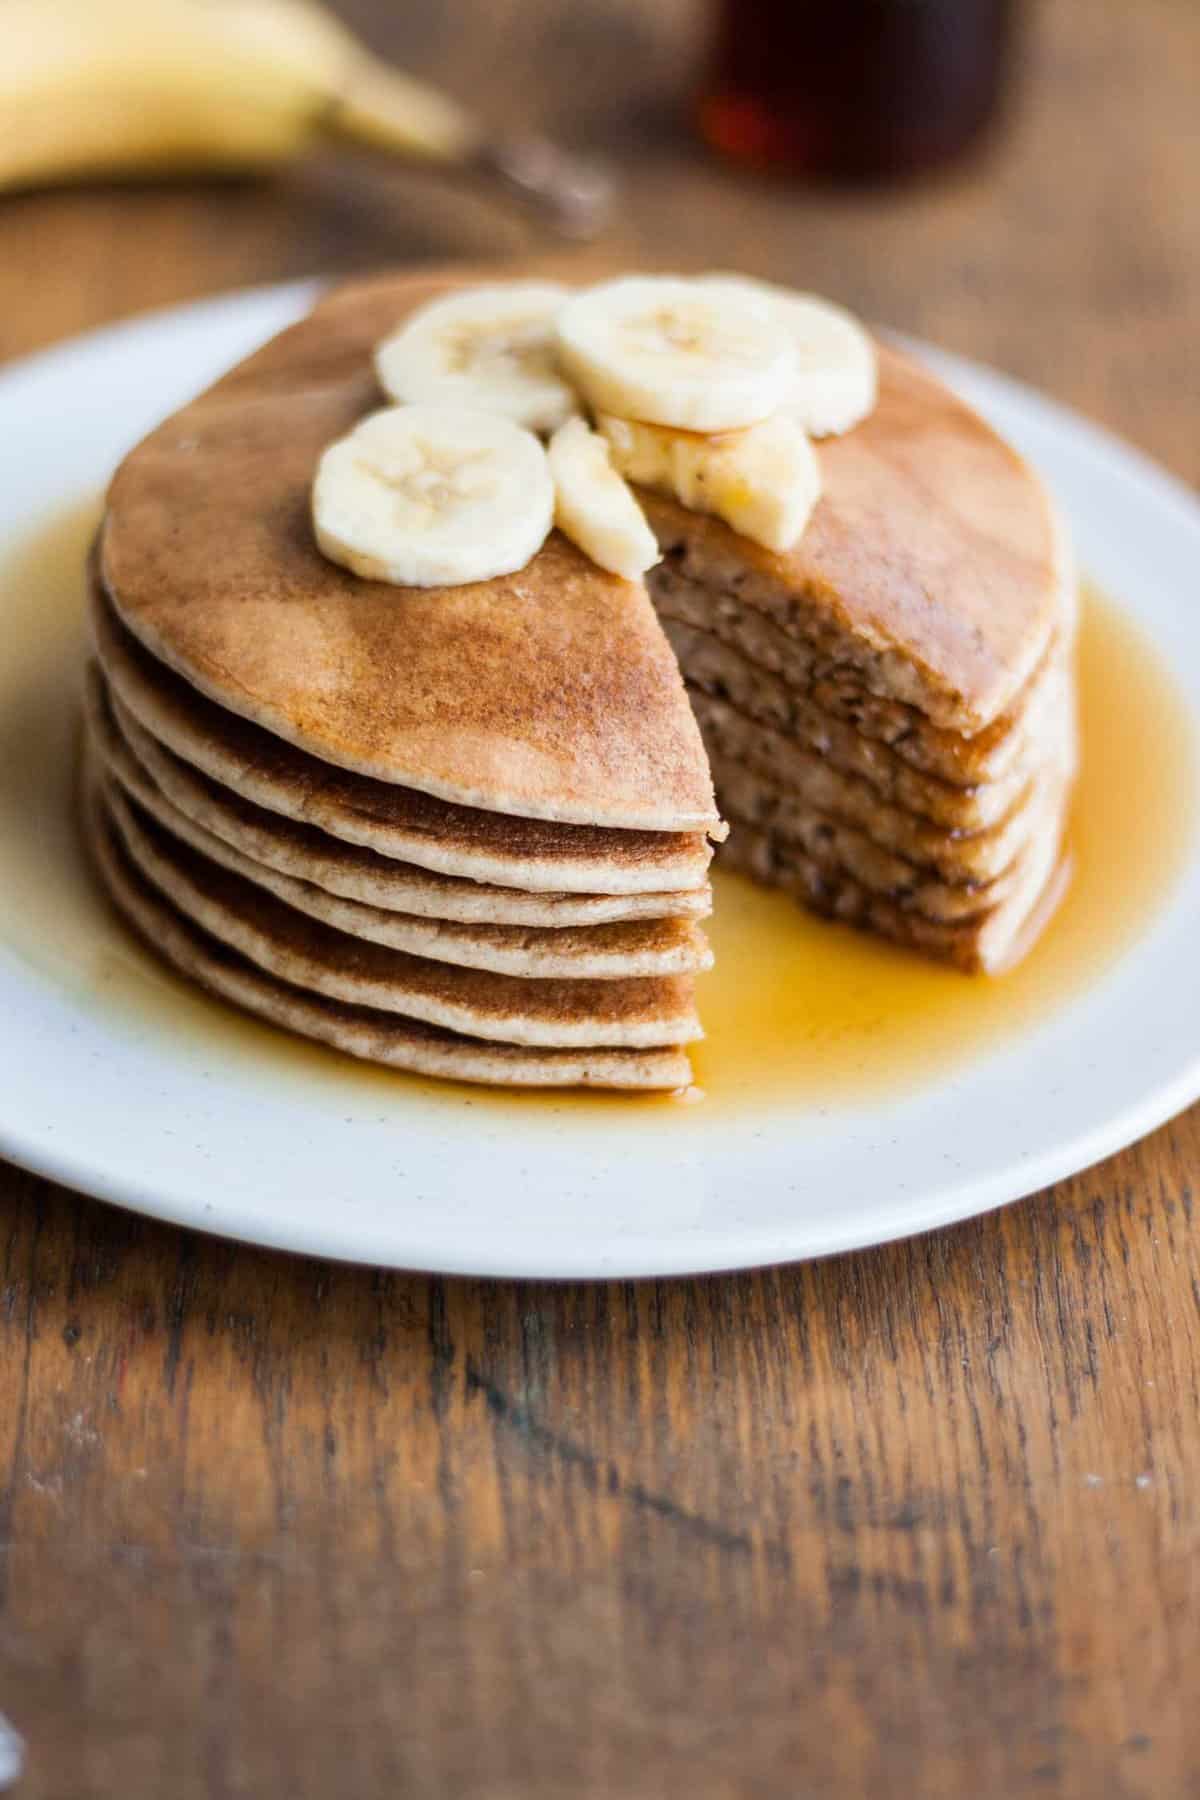 A stack of pancakes with a wedge cut out with banana slices and maple syrup.